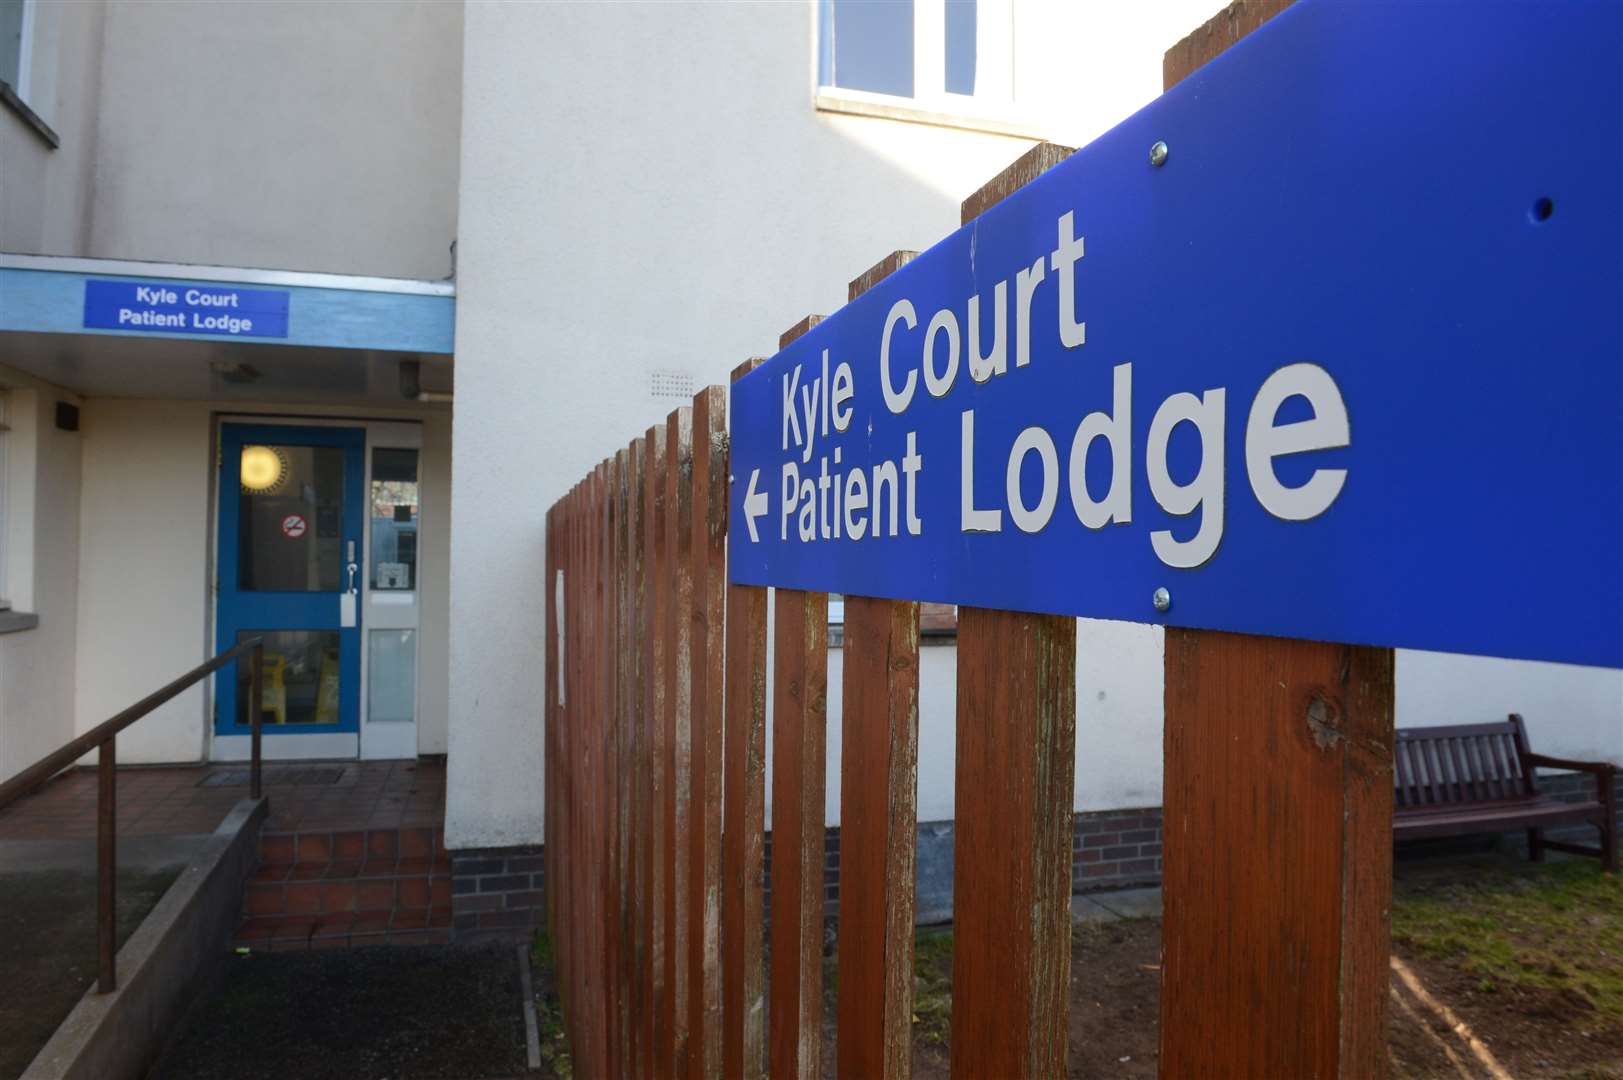 Kyle Court patient accommodation at Raigmore Hospital in Inverness.